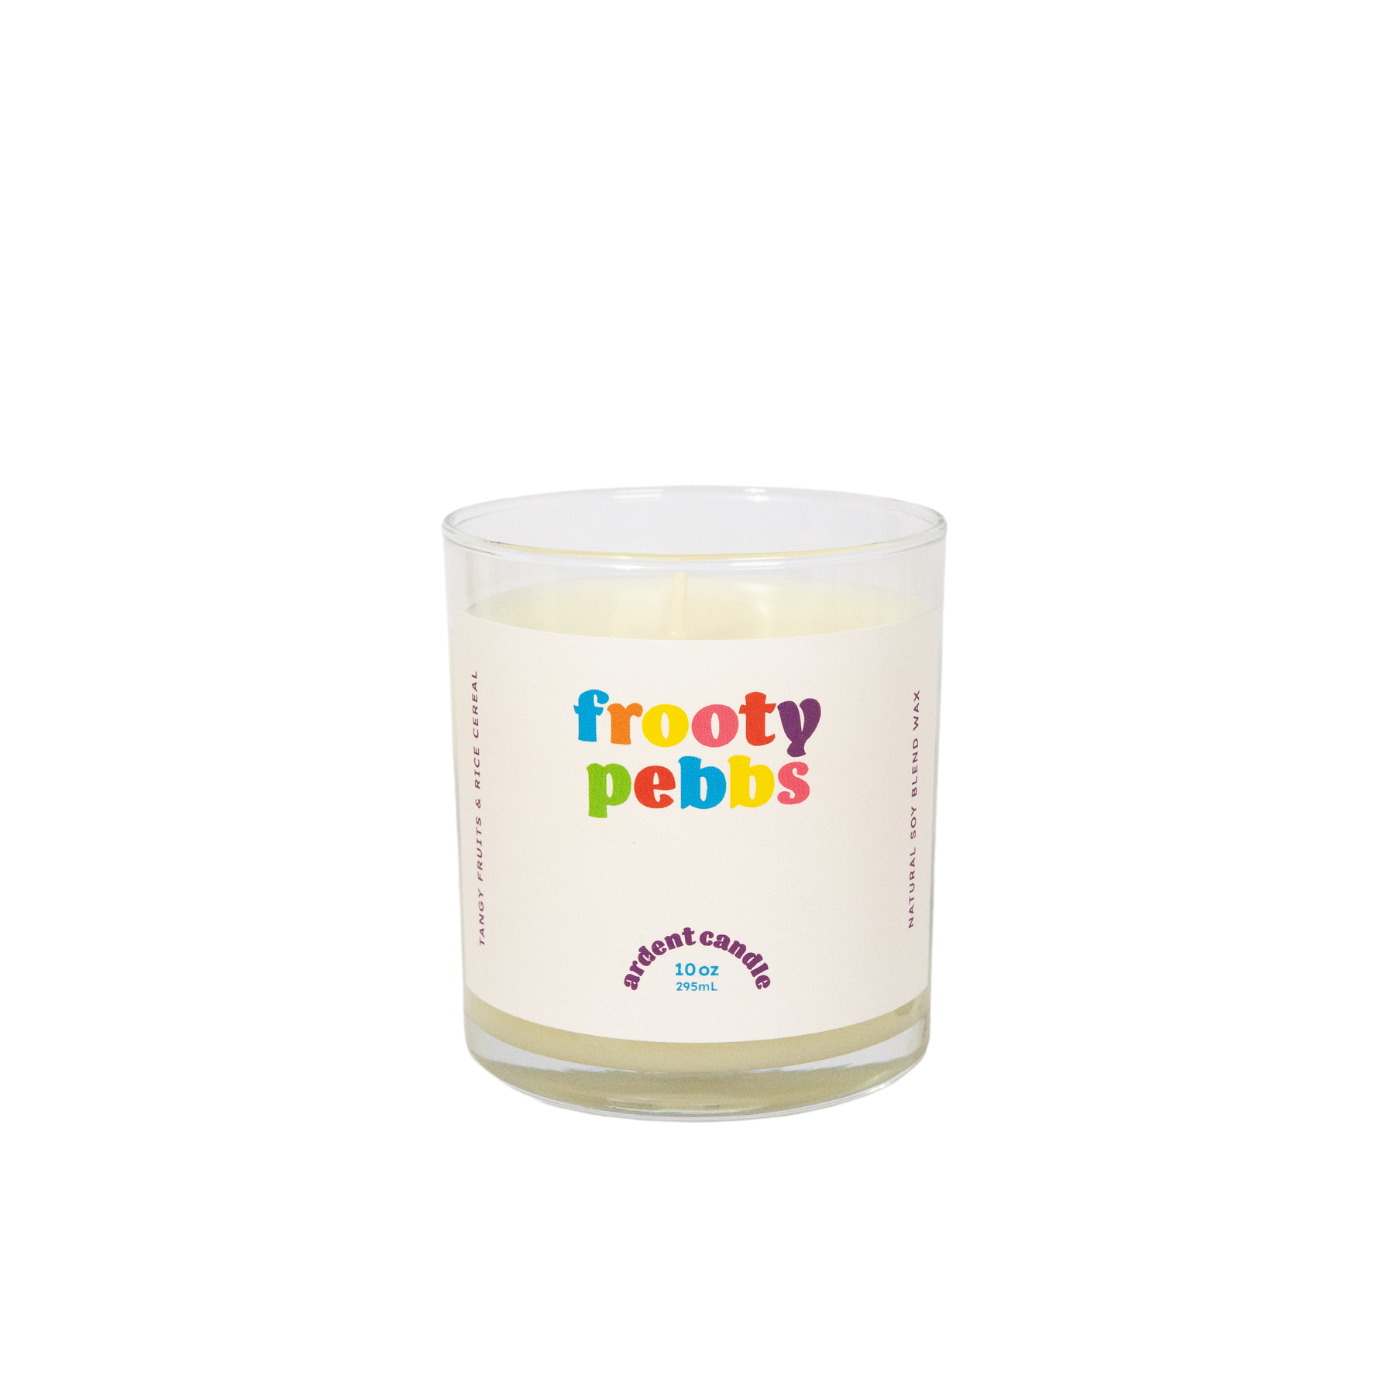 Frooty Pebbs by Ardent Candle